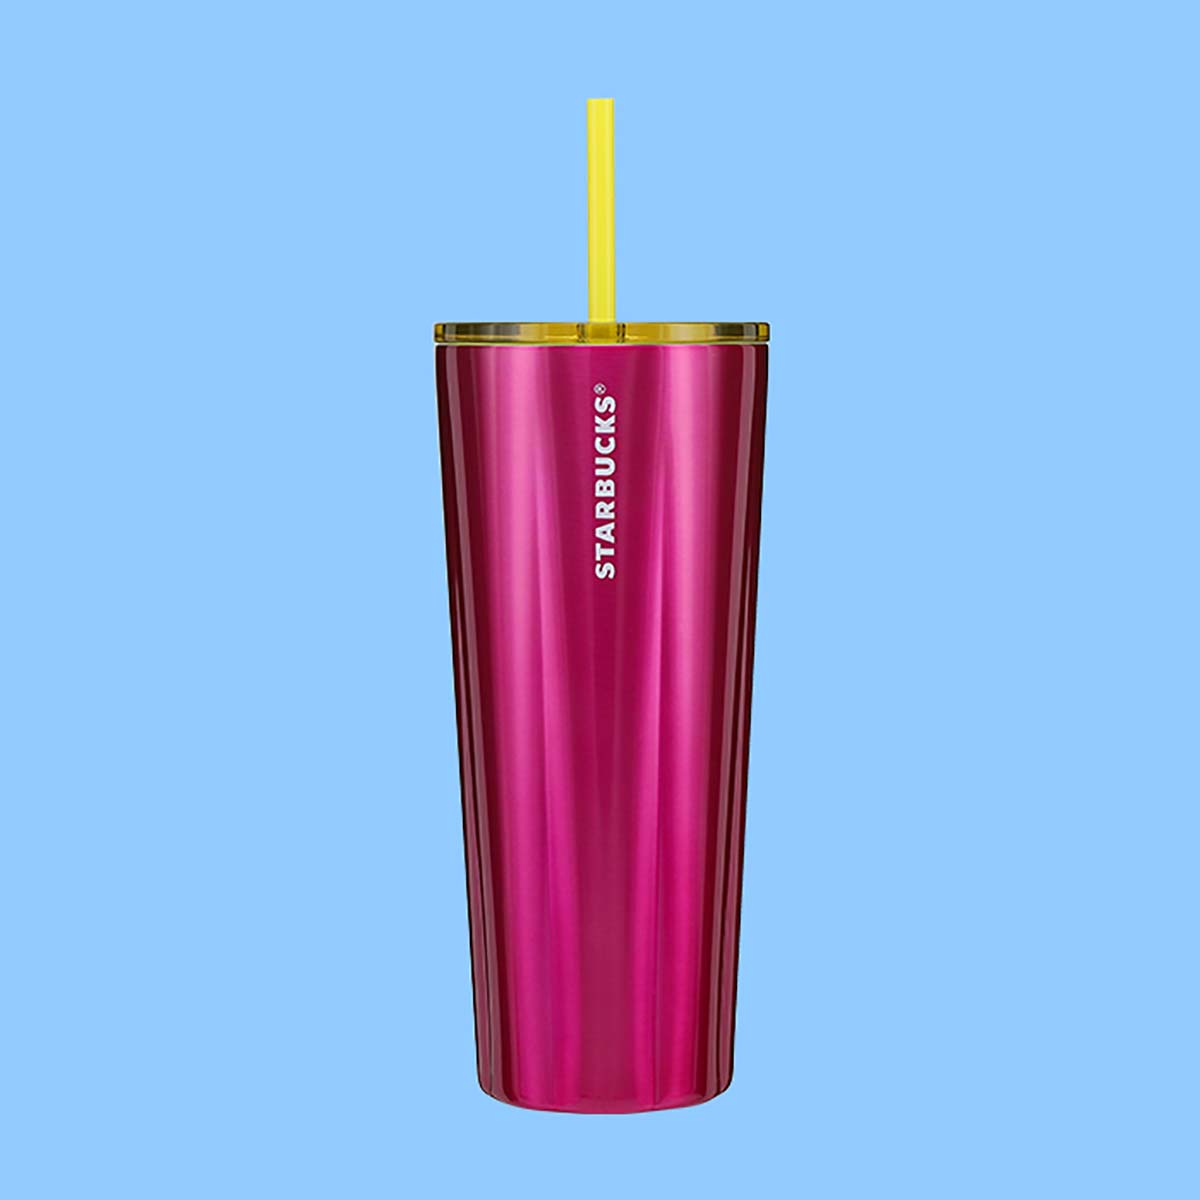 Starbucks Stainless Steel Petunia Cold Cup (24 oz).